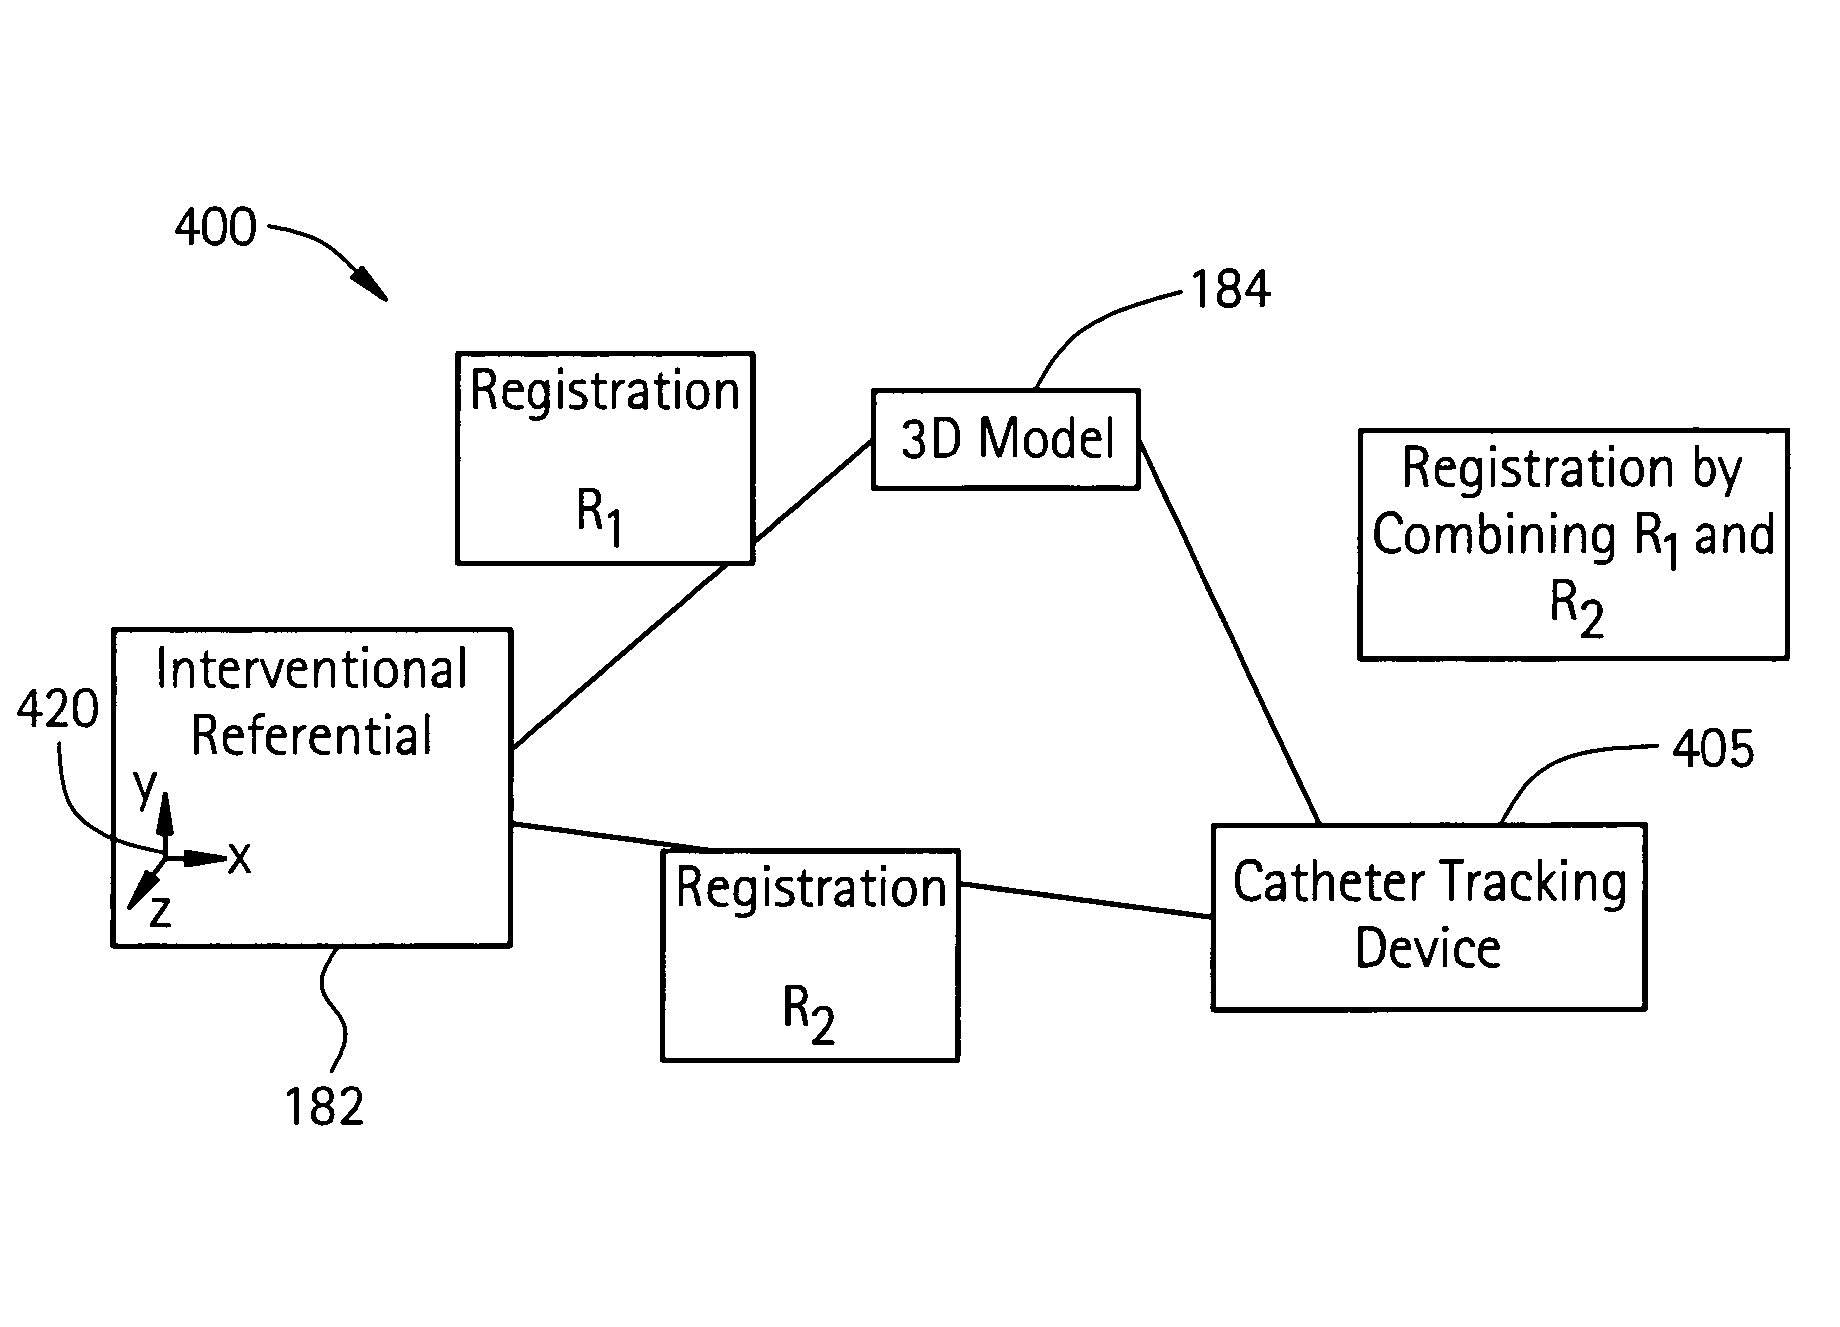 Method and apparatus for registering 3D models of anatomical regions of a heart and a tracking system with projection images of an interventional fluoroscopic system